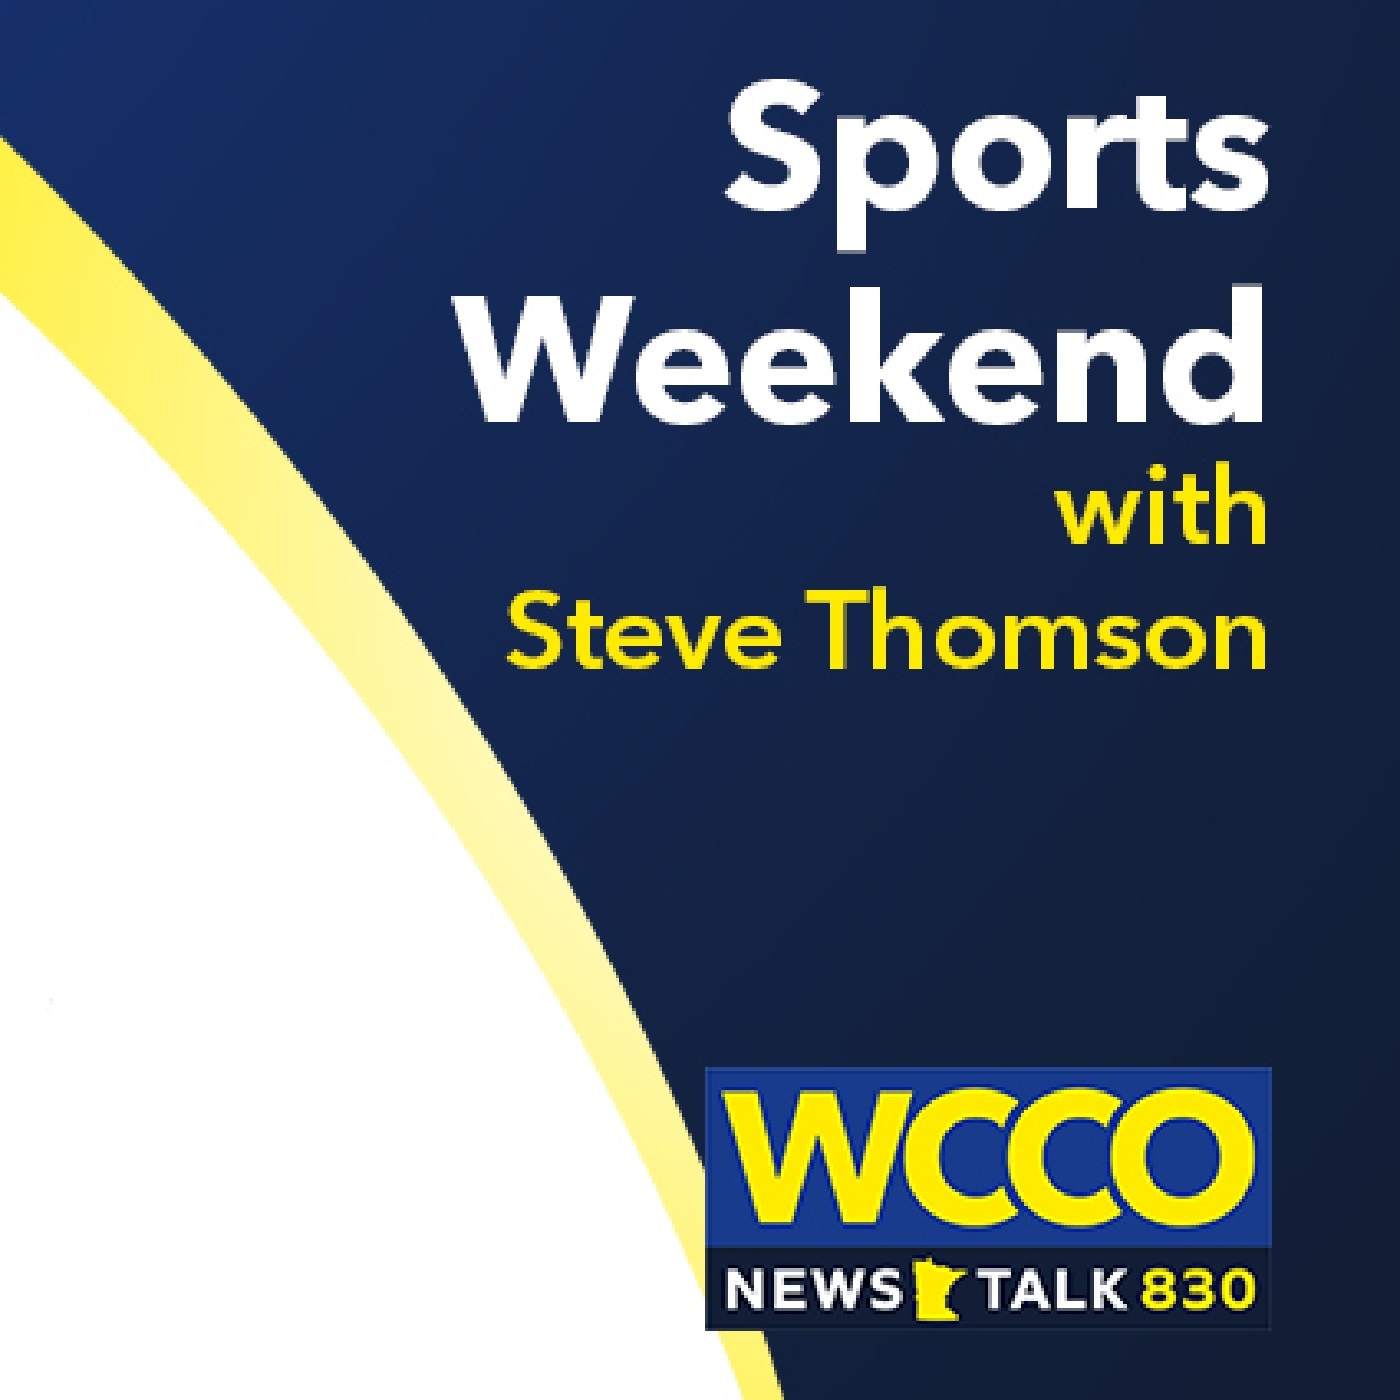 Steve recaps college football and high school football games and scores